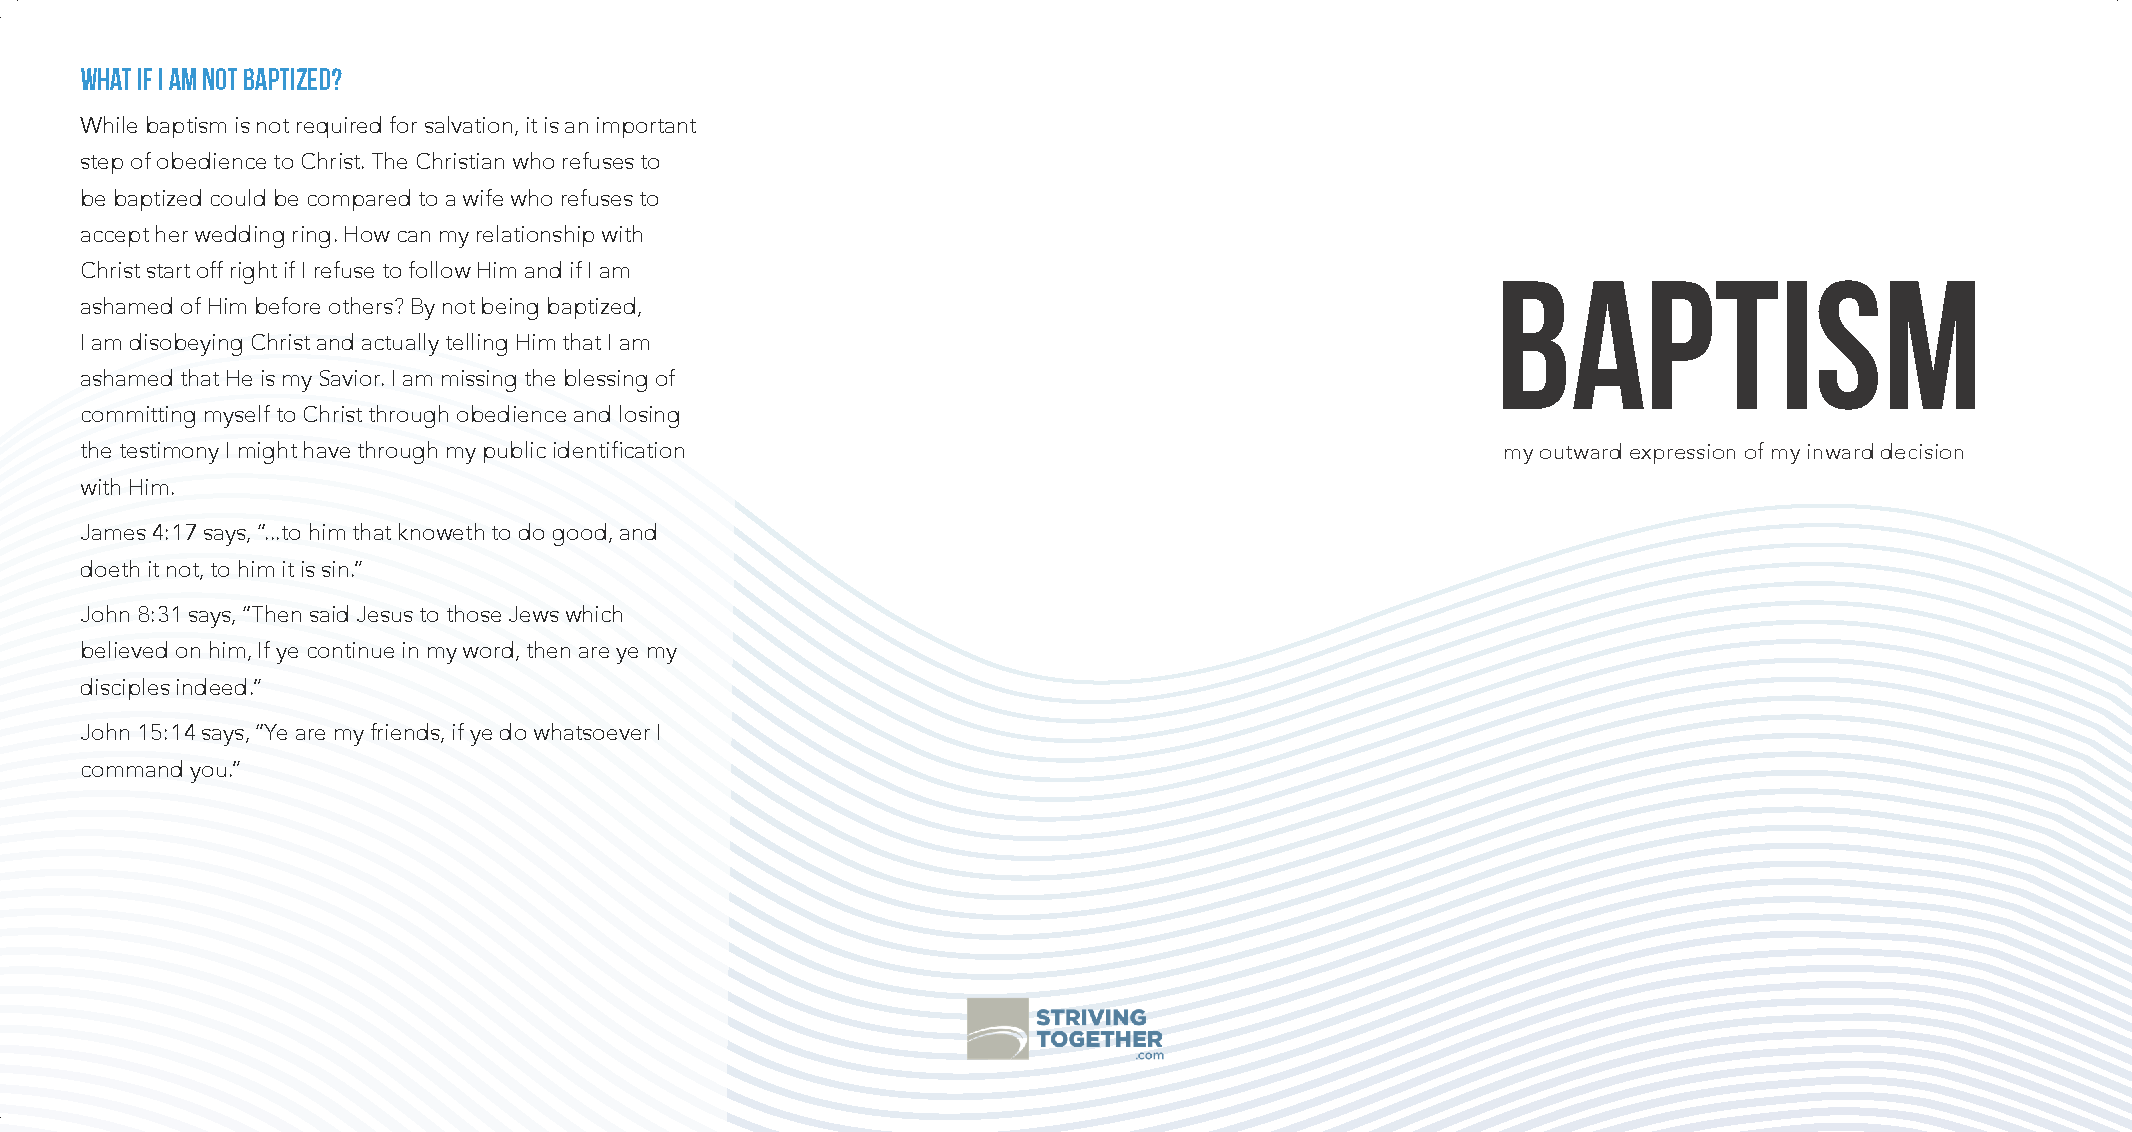 Baptism Brochure Trifold (English)-Pack of 100